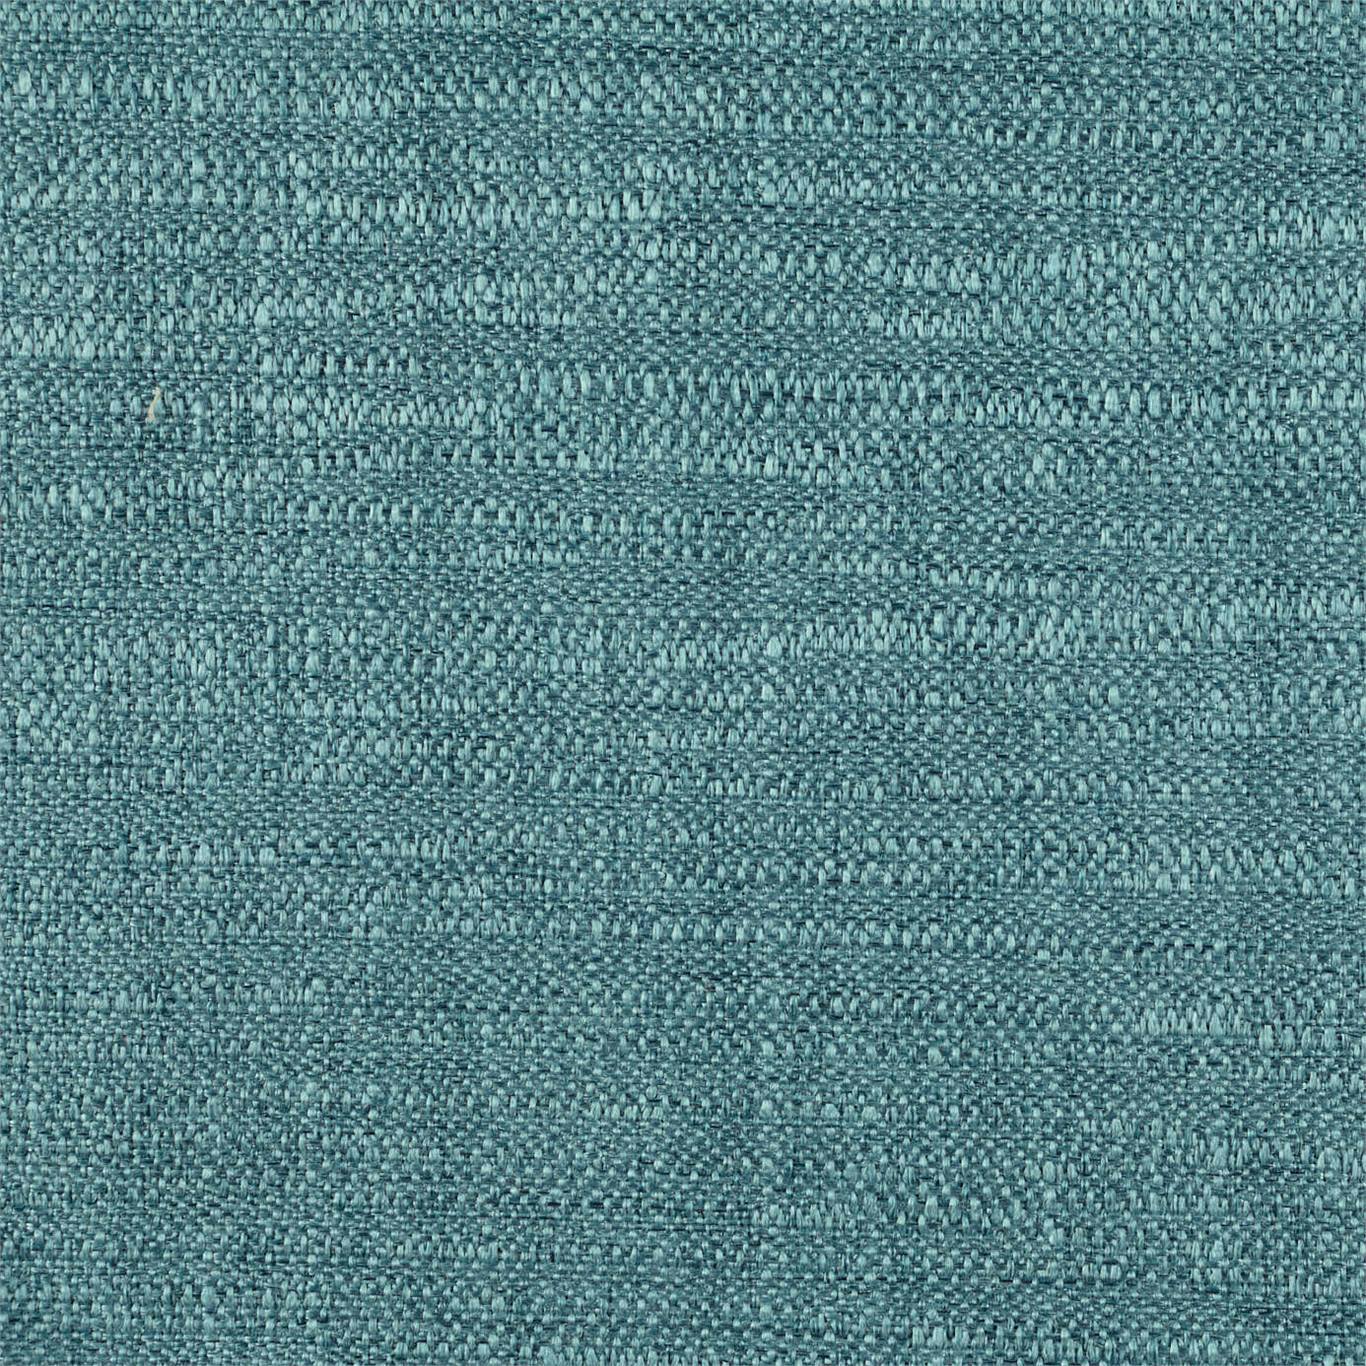 Extensive Lagoon Fabric by HAR